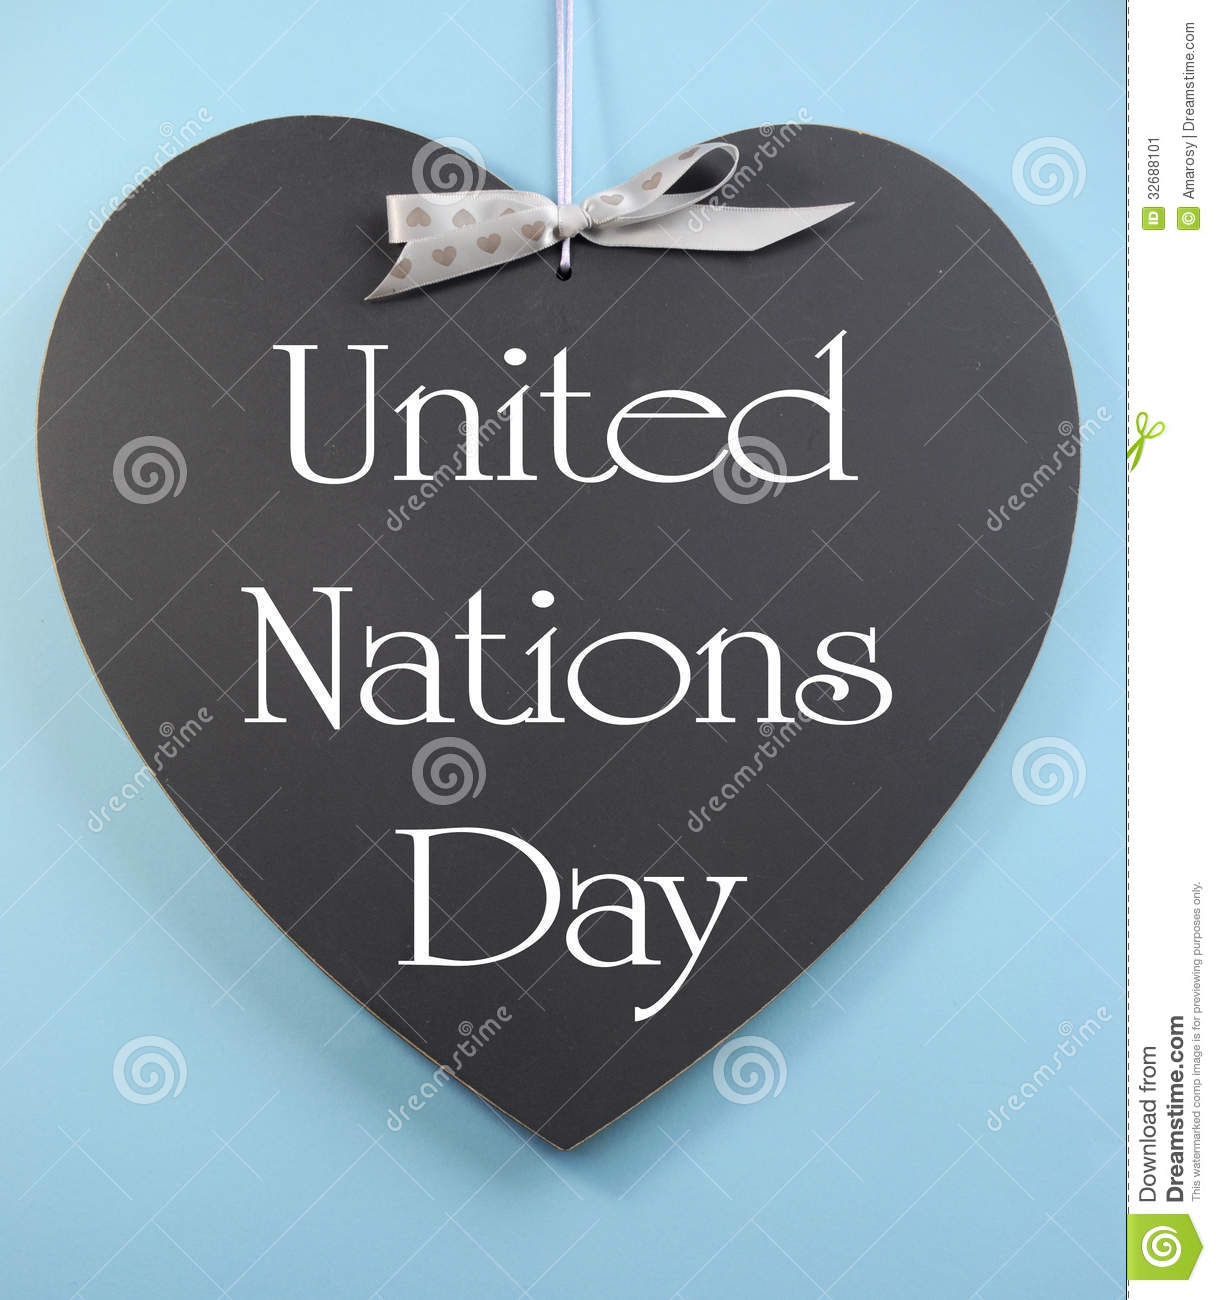 Stock Image  United Nations Day Text Message Greeting Written On Heart